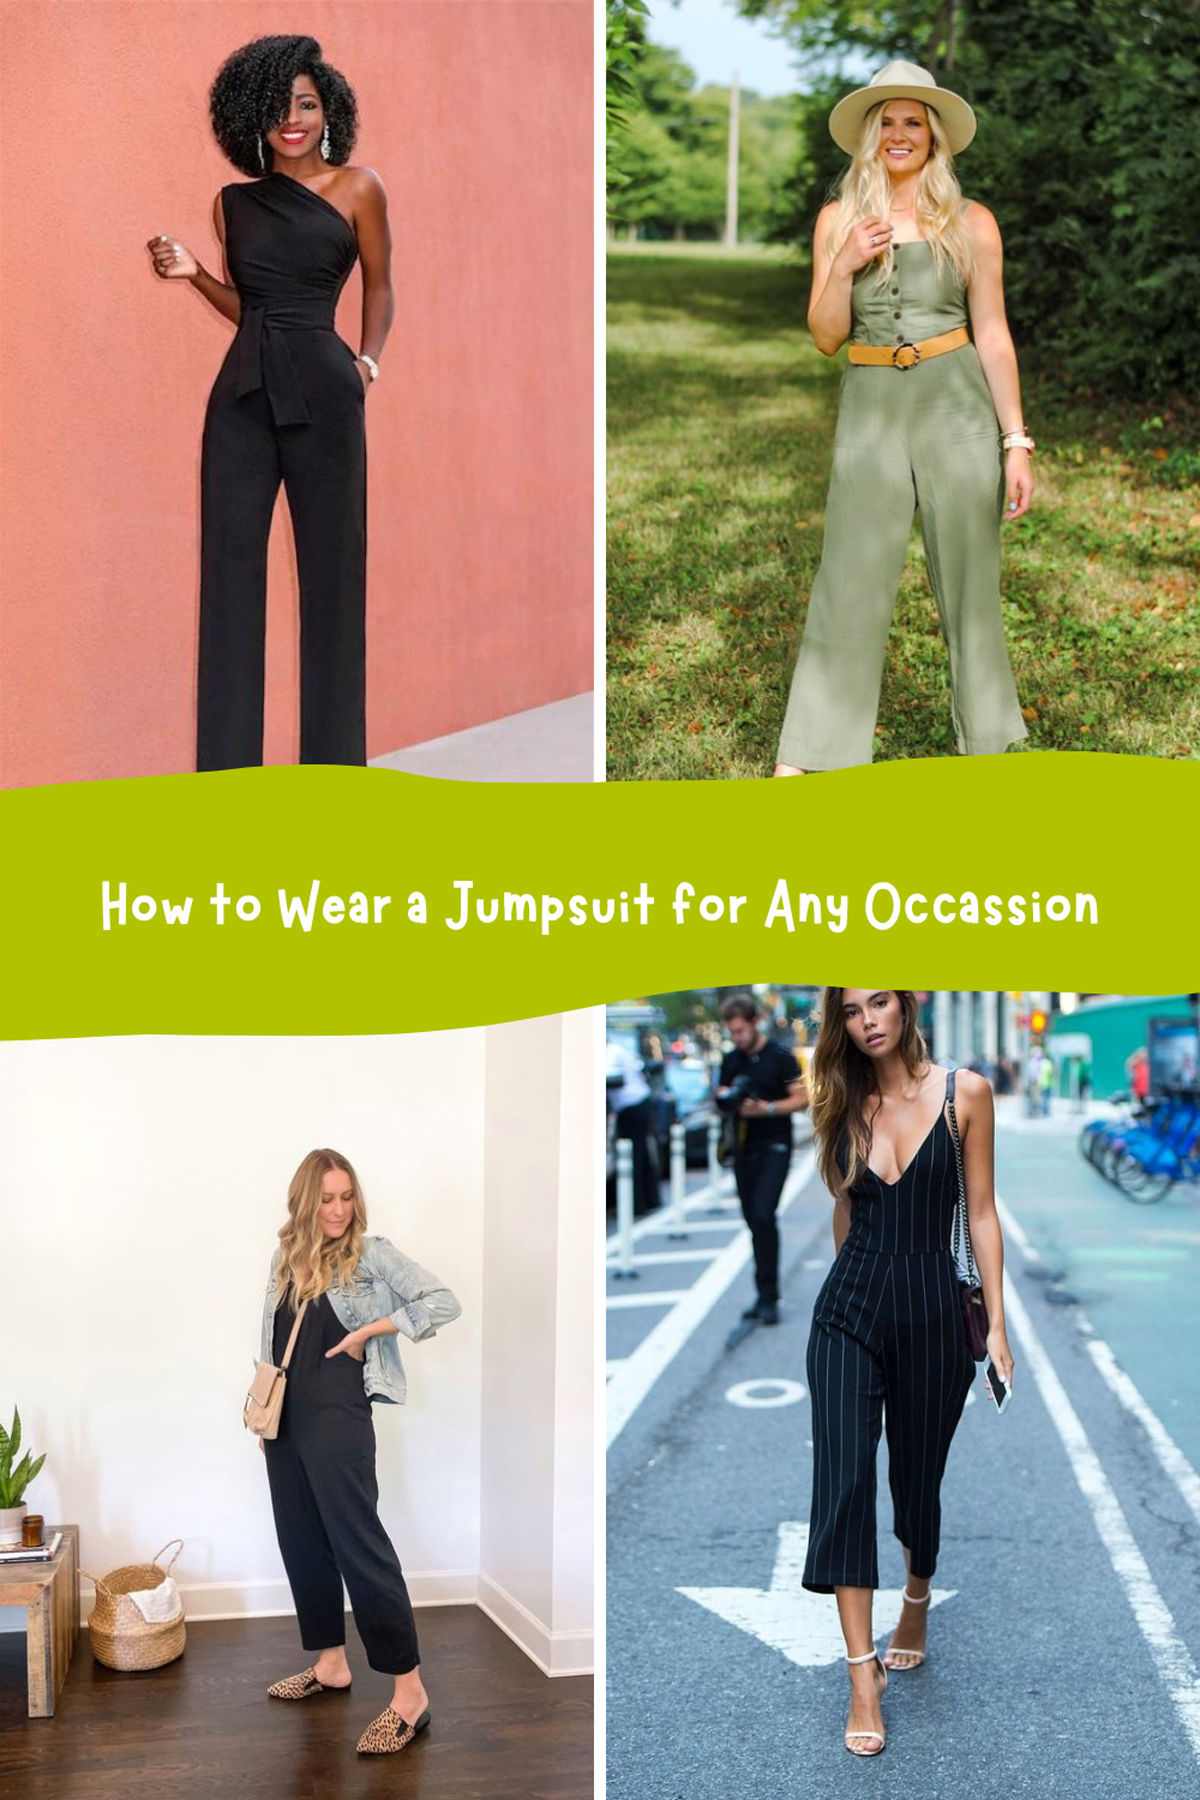 Style Tips for Jumpsuit